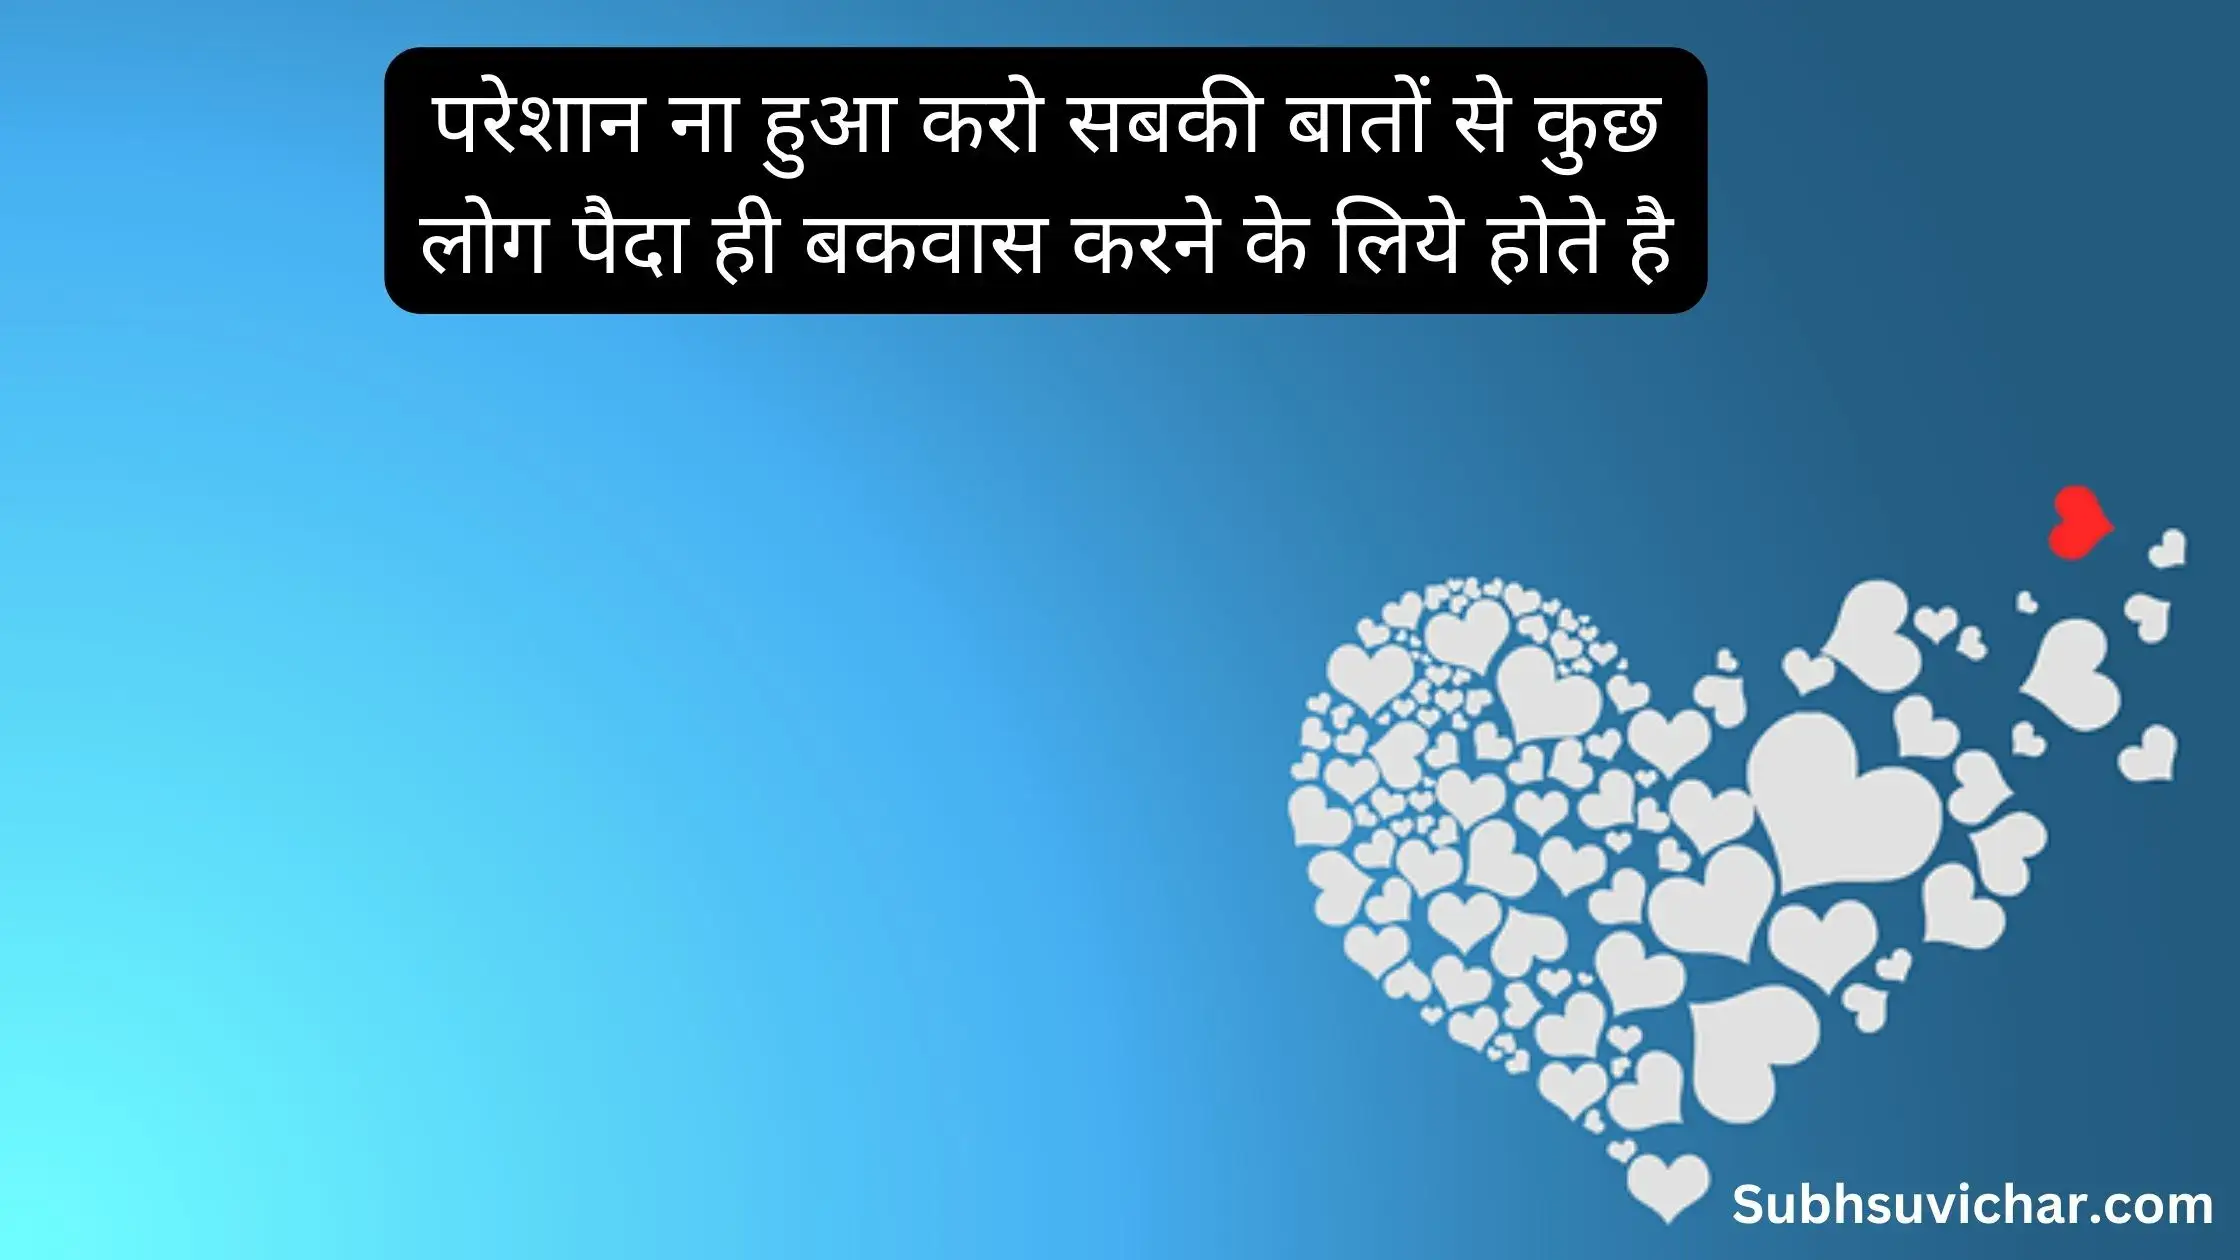 This post contains huge collection of instagram shayari in hindi font with high quality images for your whatsaap and facebook status.